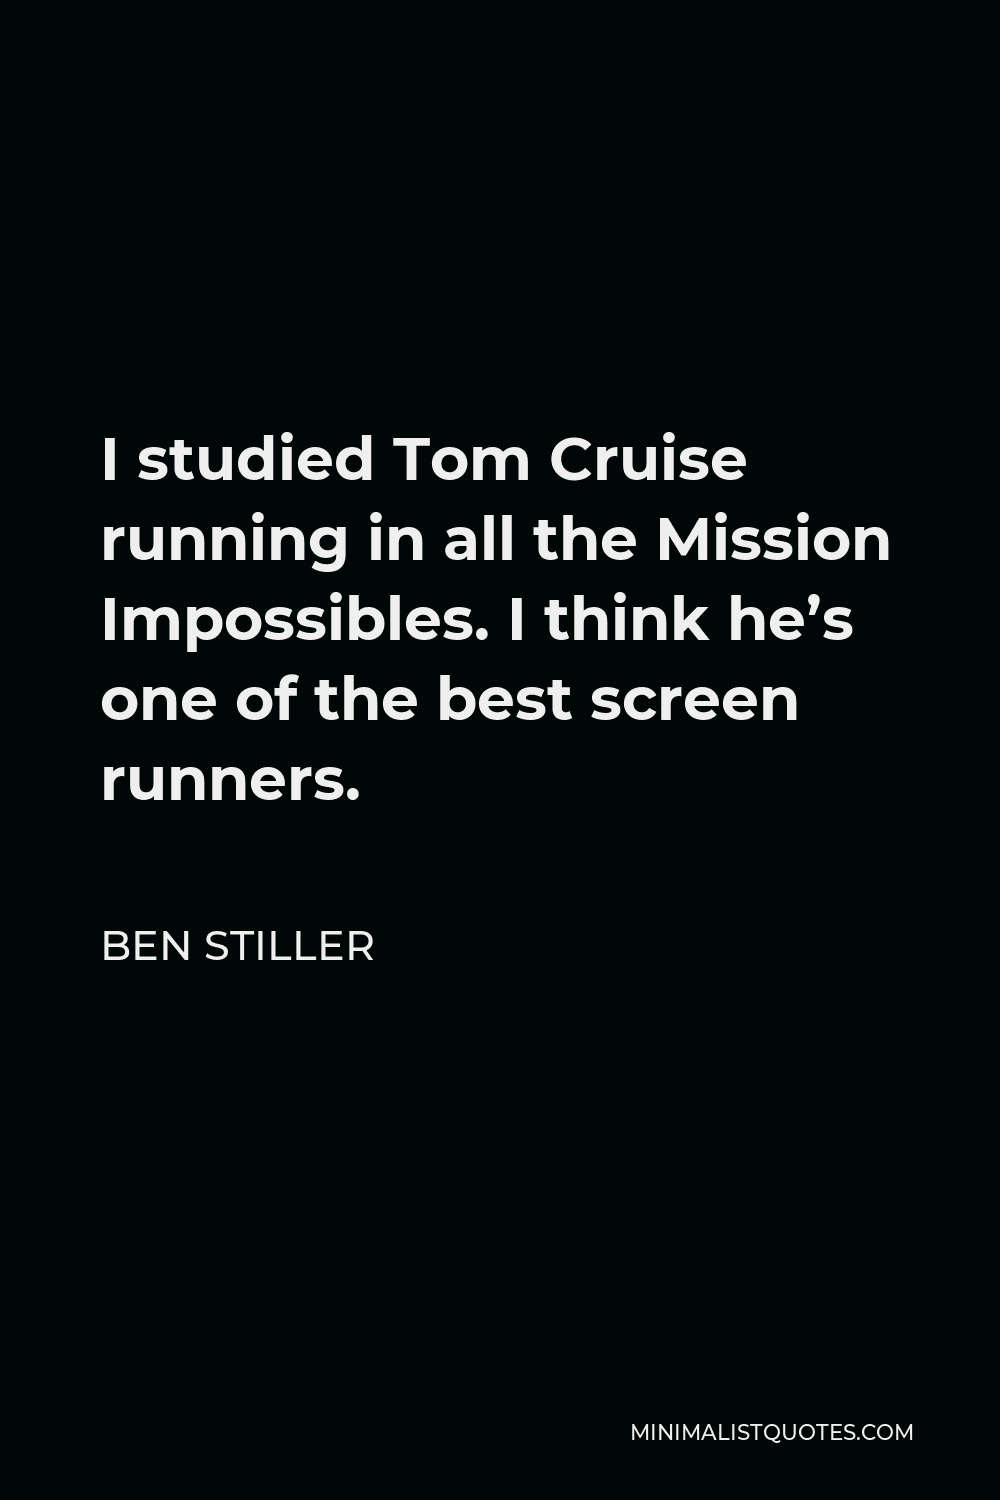 Ben Stiller Quote - I studied Tom Cruise running in all the Mission Impossibles. I think he’s one of the best screen runners.